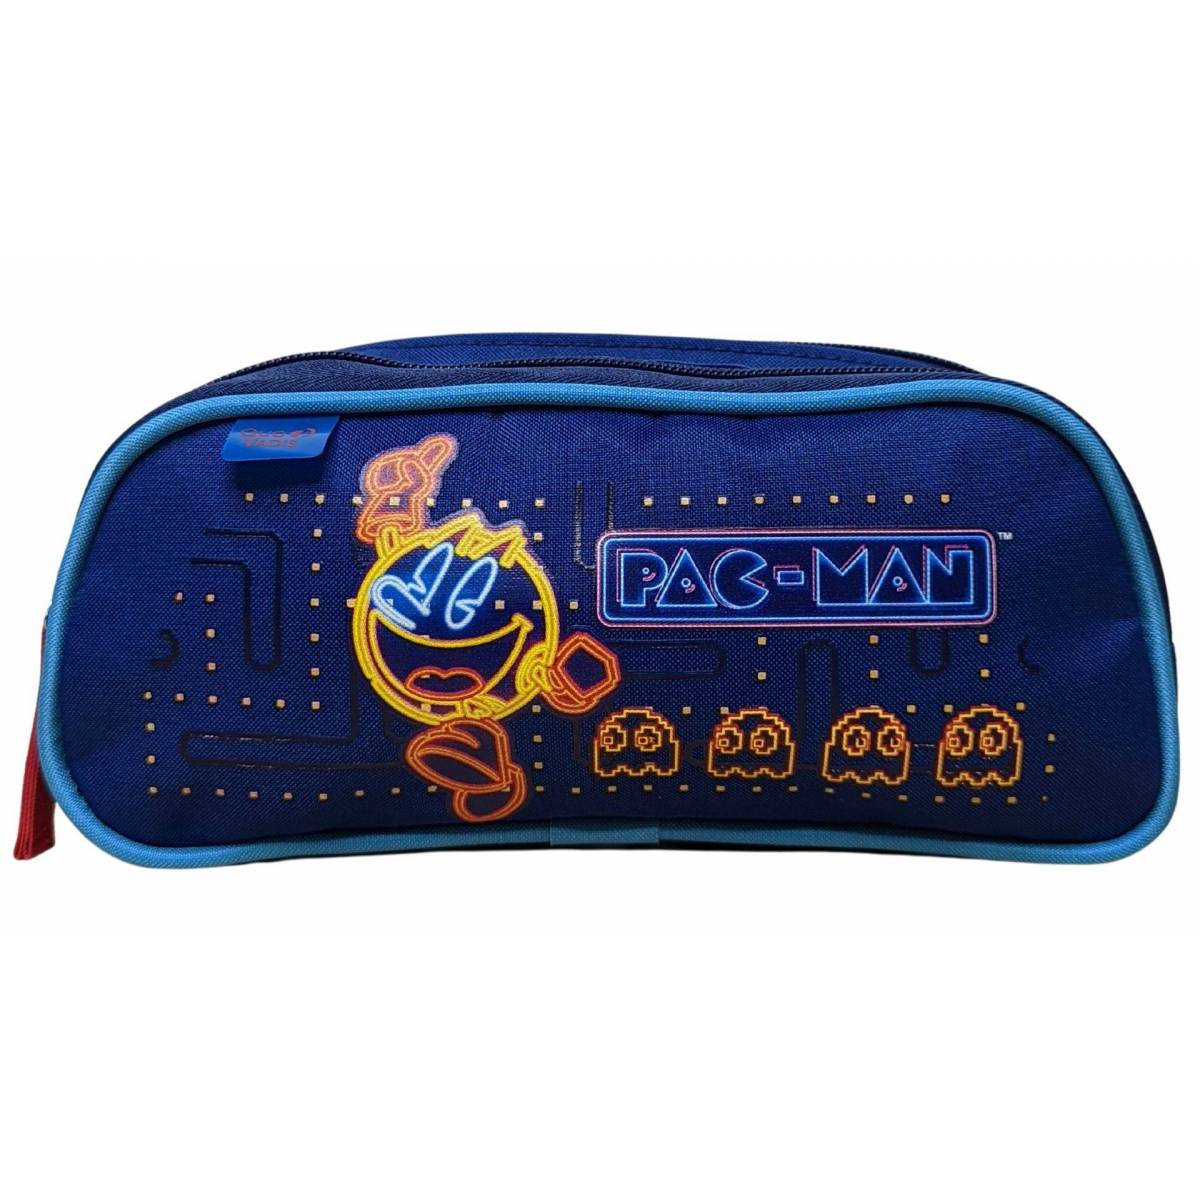 Ttrousse Quo Vadis Pac Man Gaming 2 compartiments